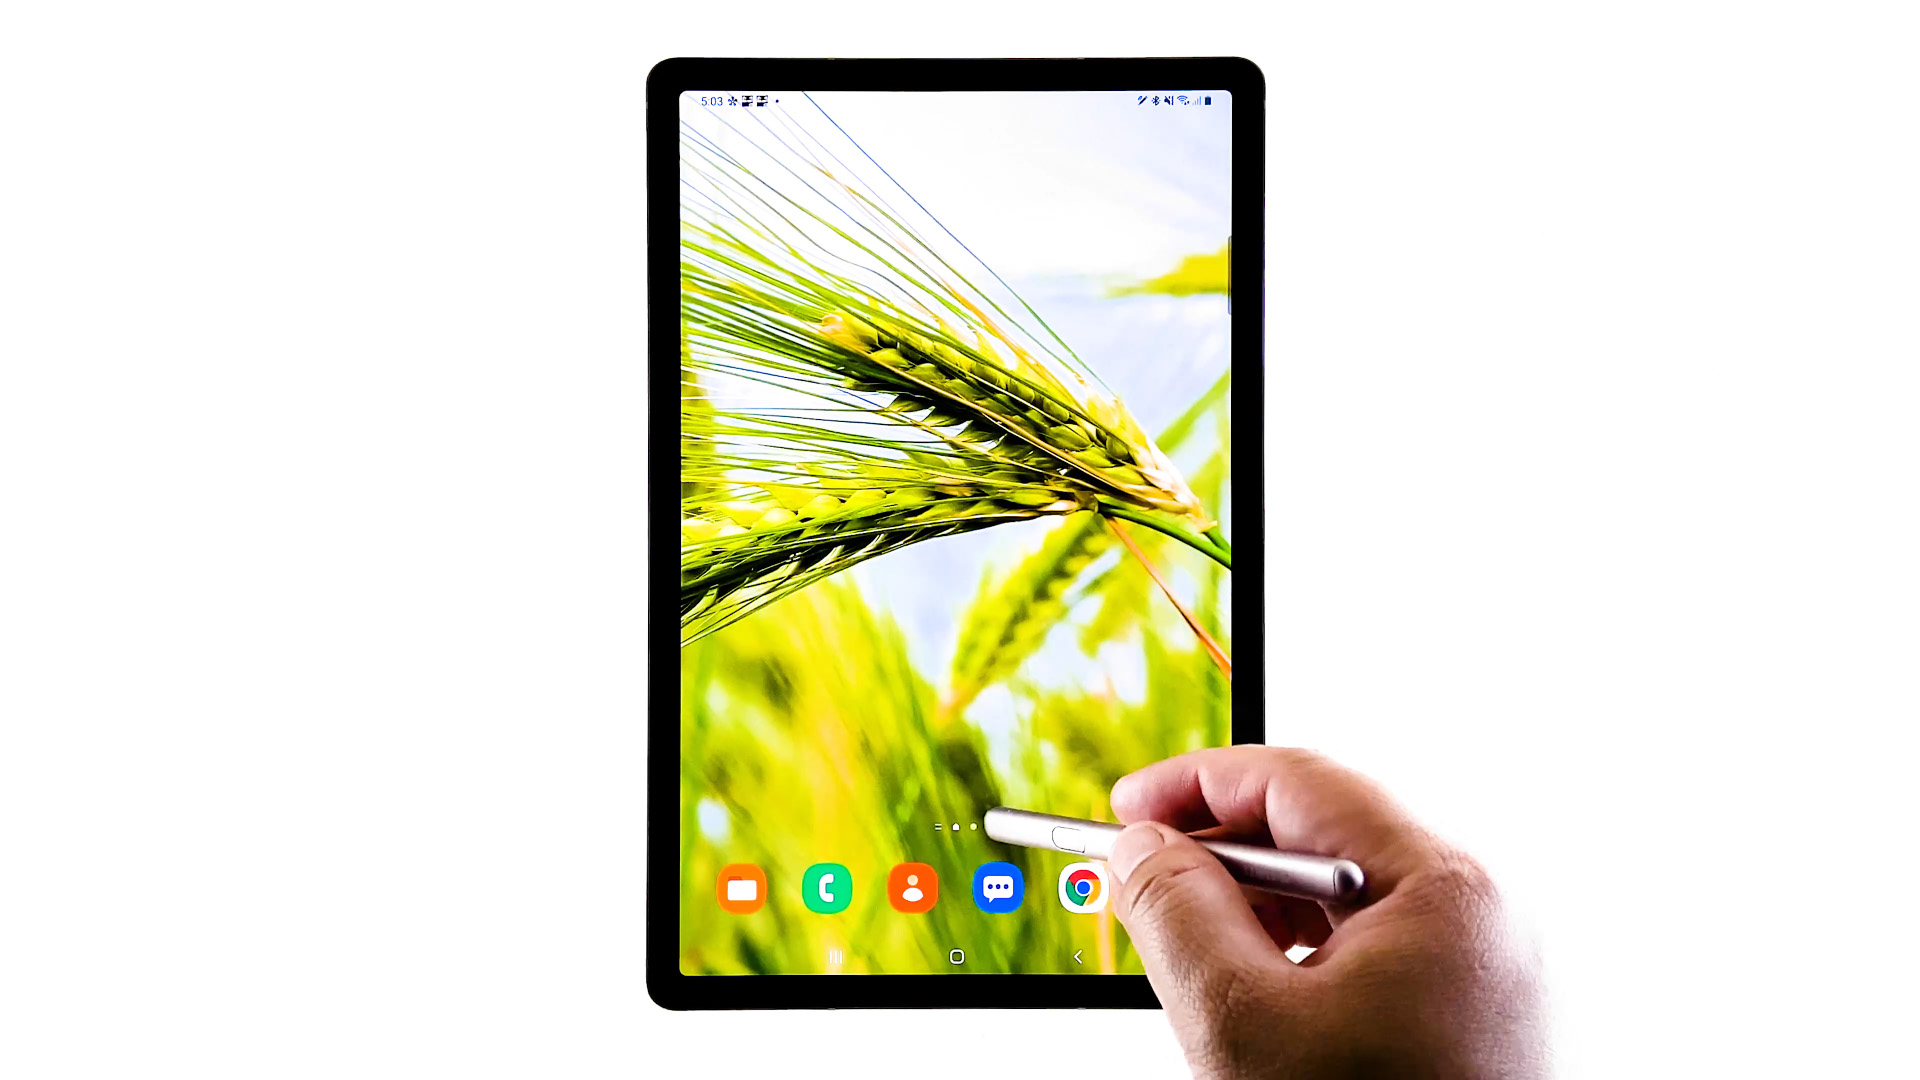 hide apps from tab s6 home screen - main